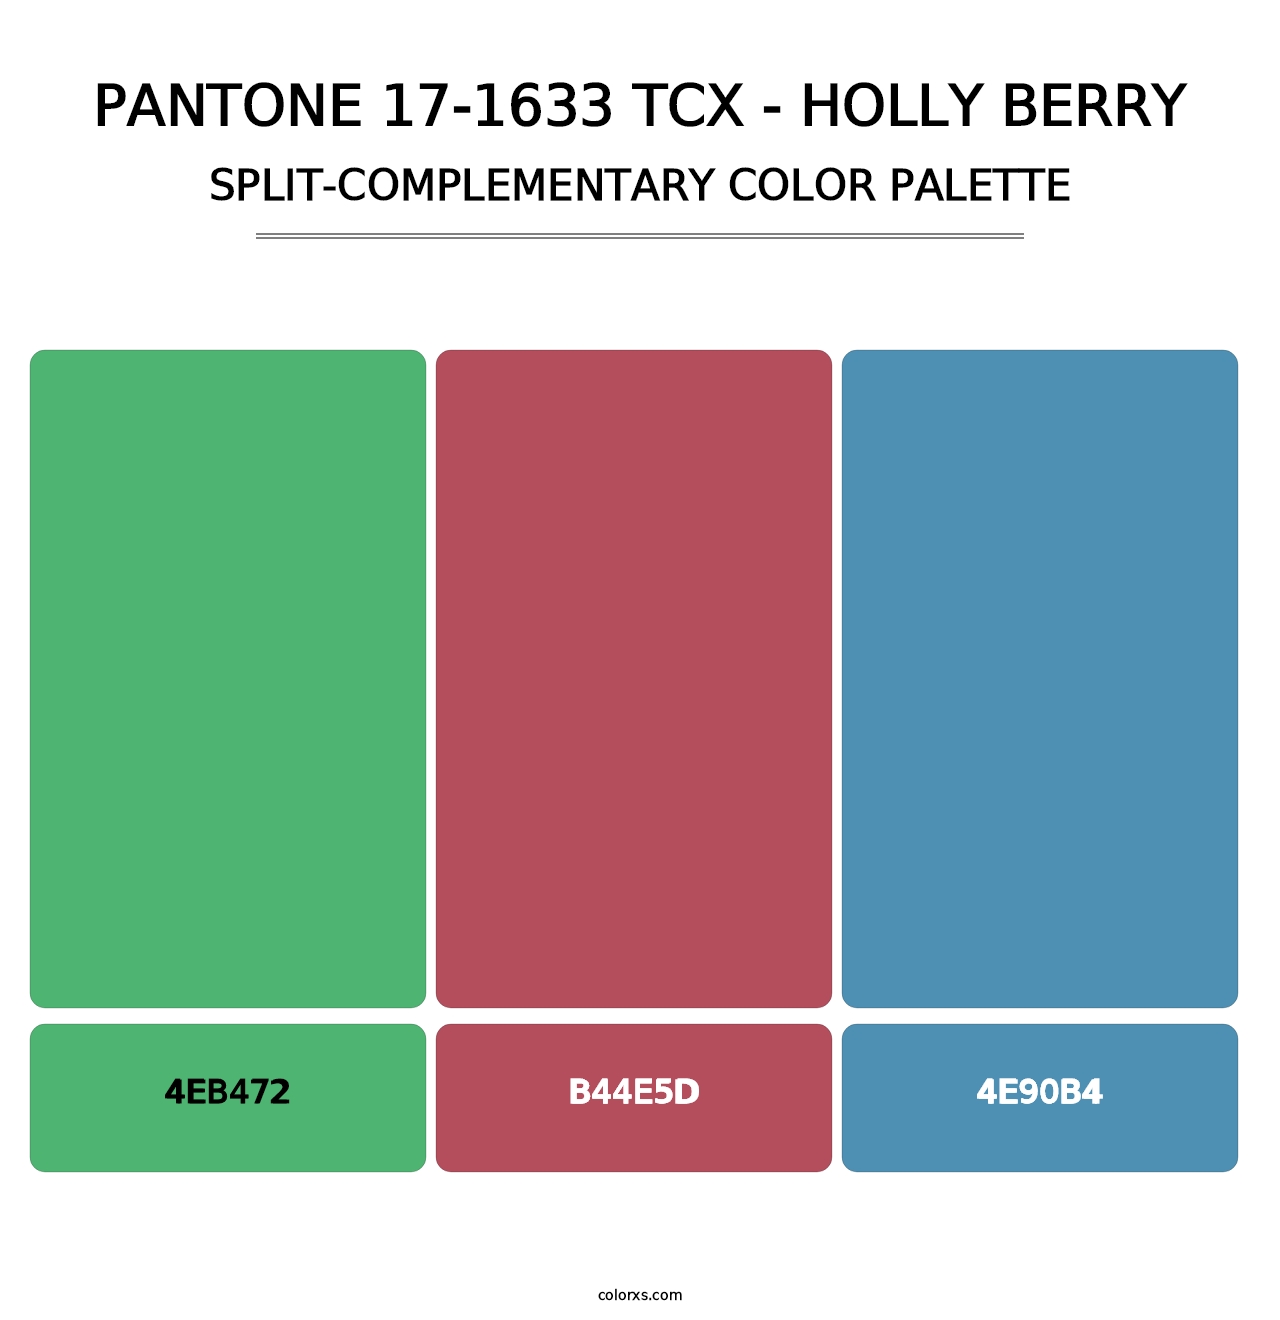 PANTONE 17-1633 TCX - Holly Berry - Split-Complementary Color Palette